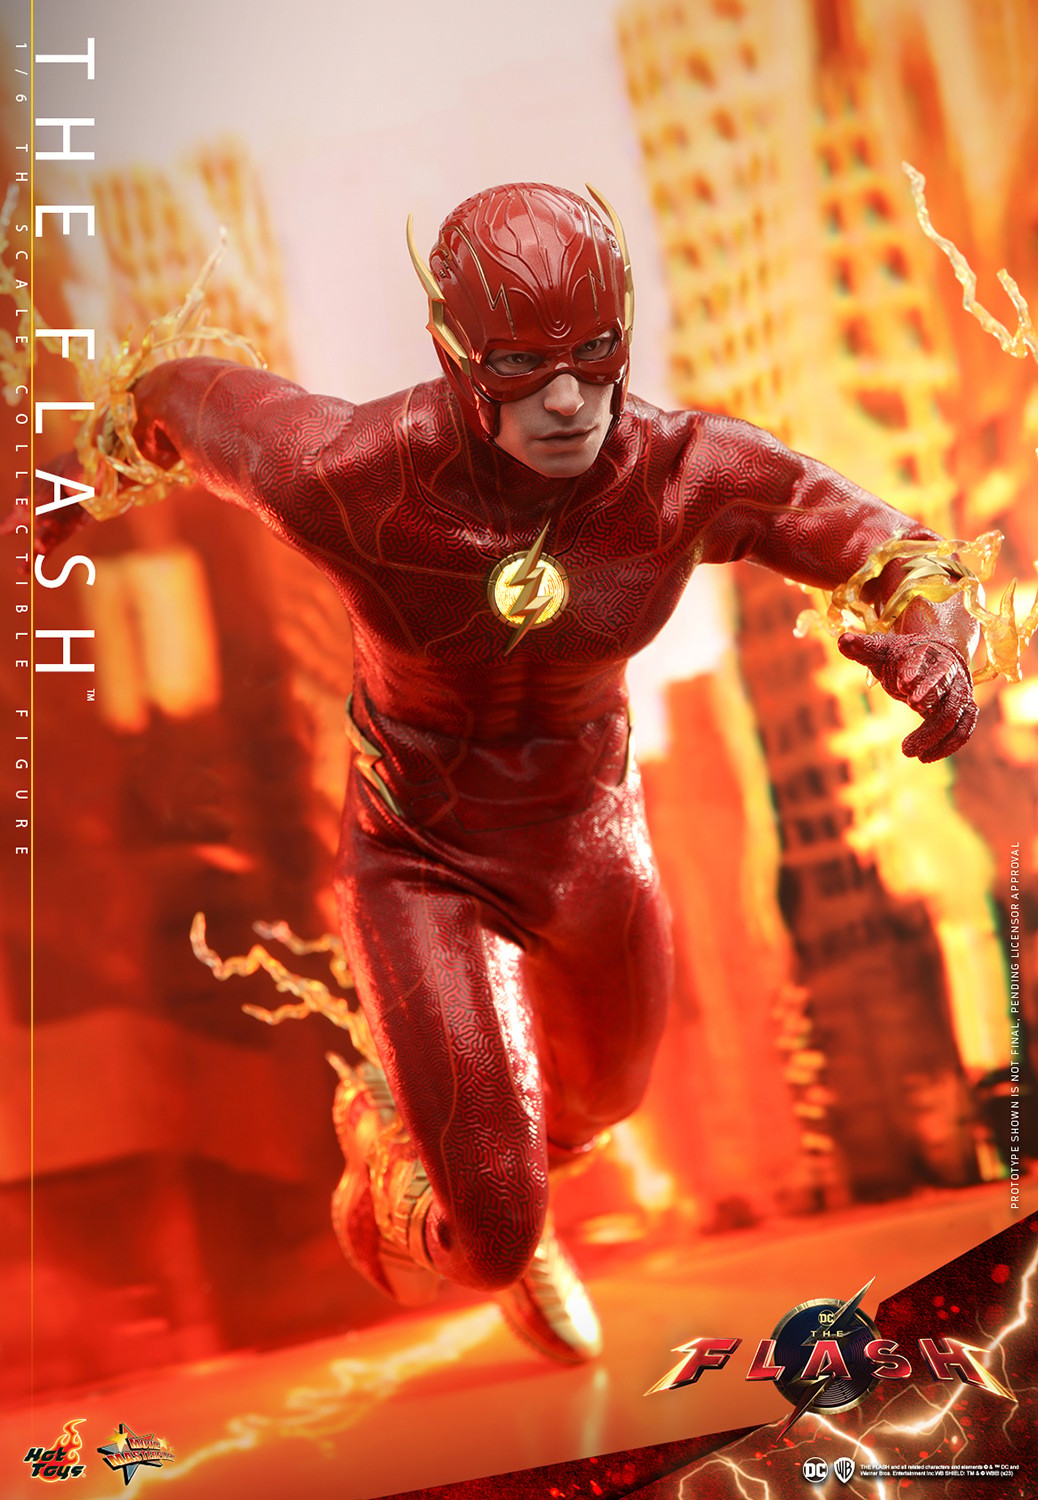 The Flash Collector Edition (Prototype Shown) View 9